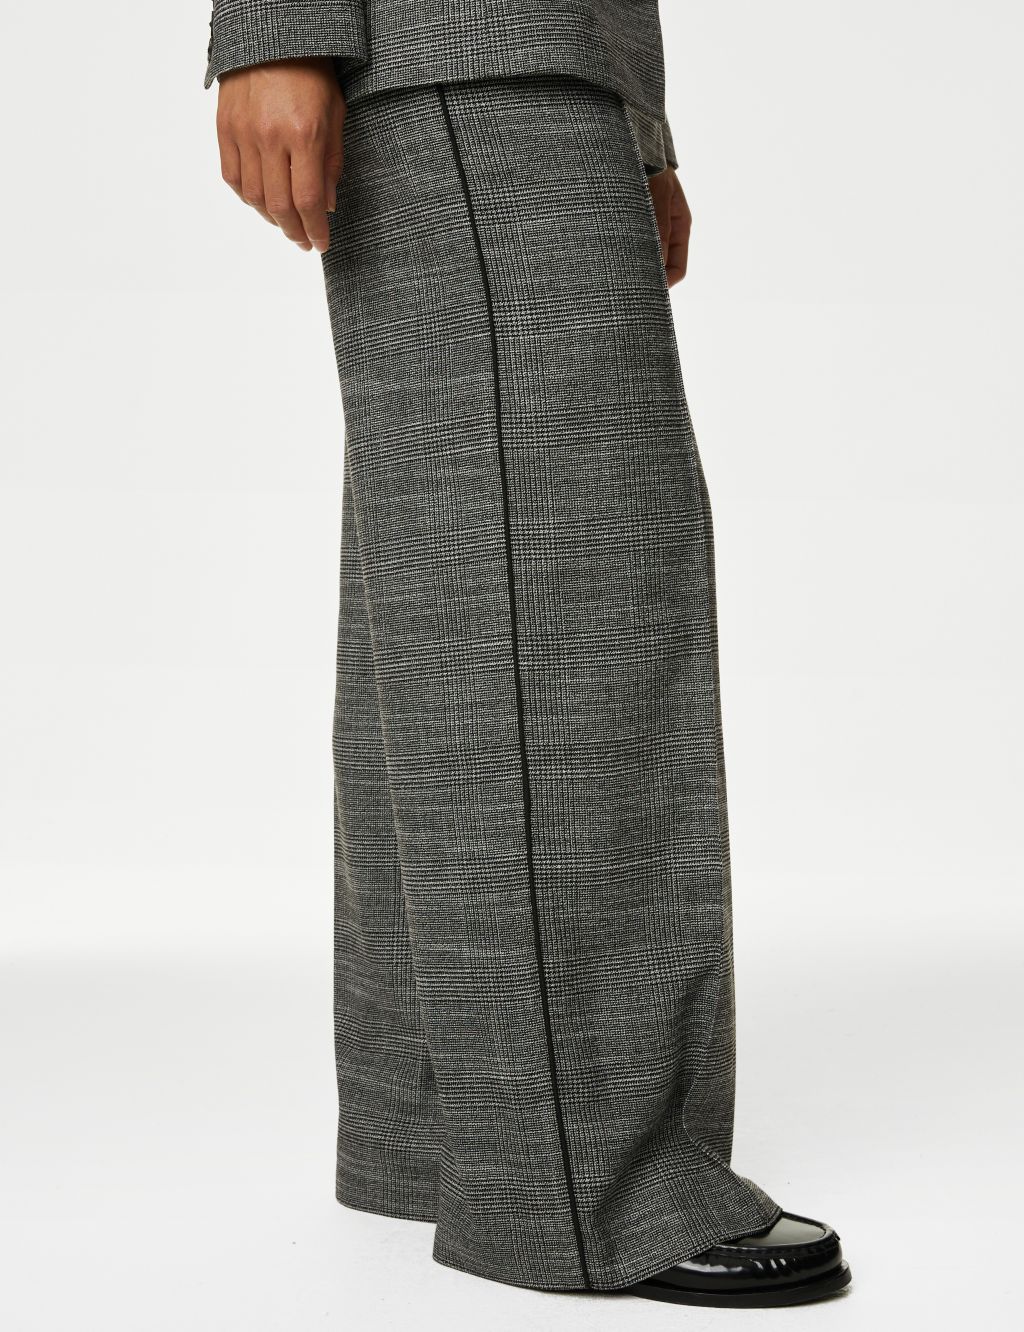 Checked Seam Detail Wide Leg Trousers image 4